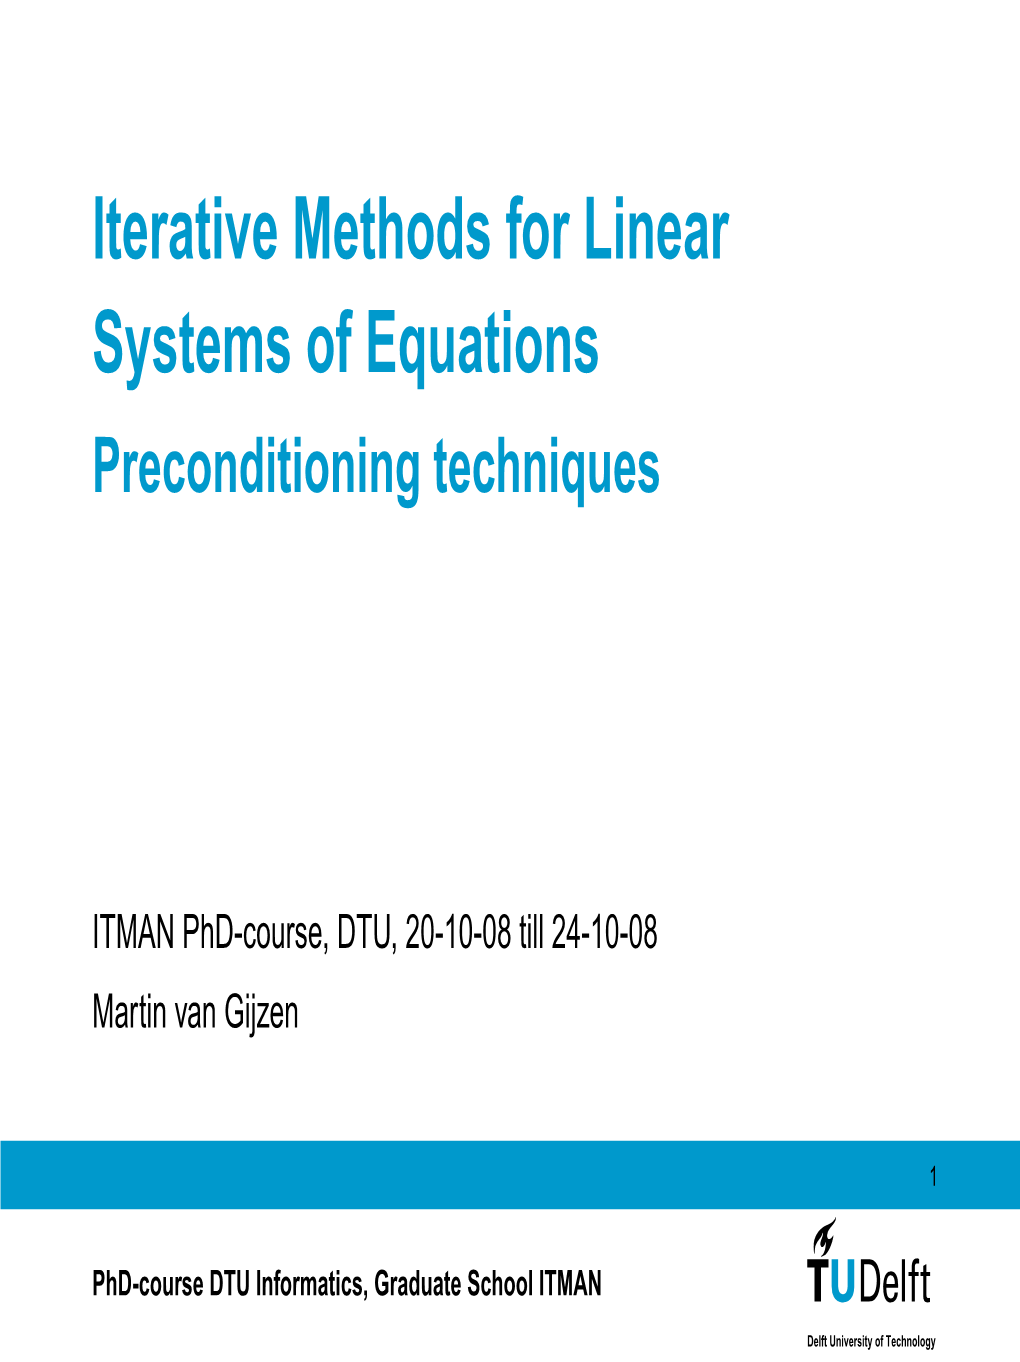 Iterative Methods for Linear Systems of Equations Preconditioning Techniques